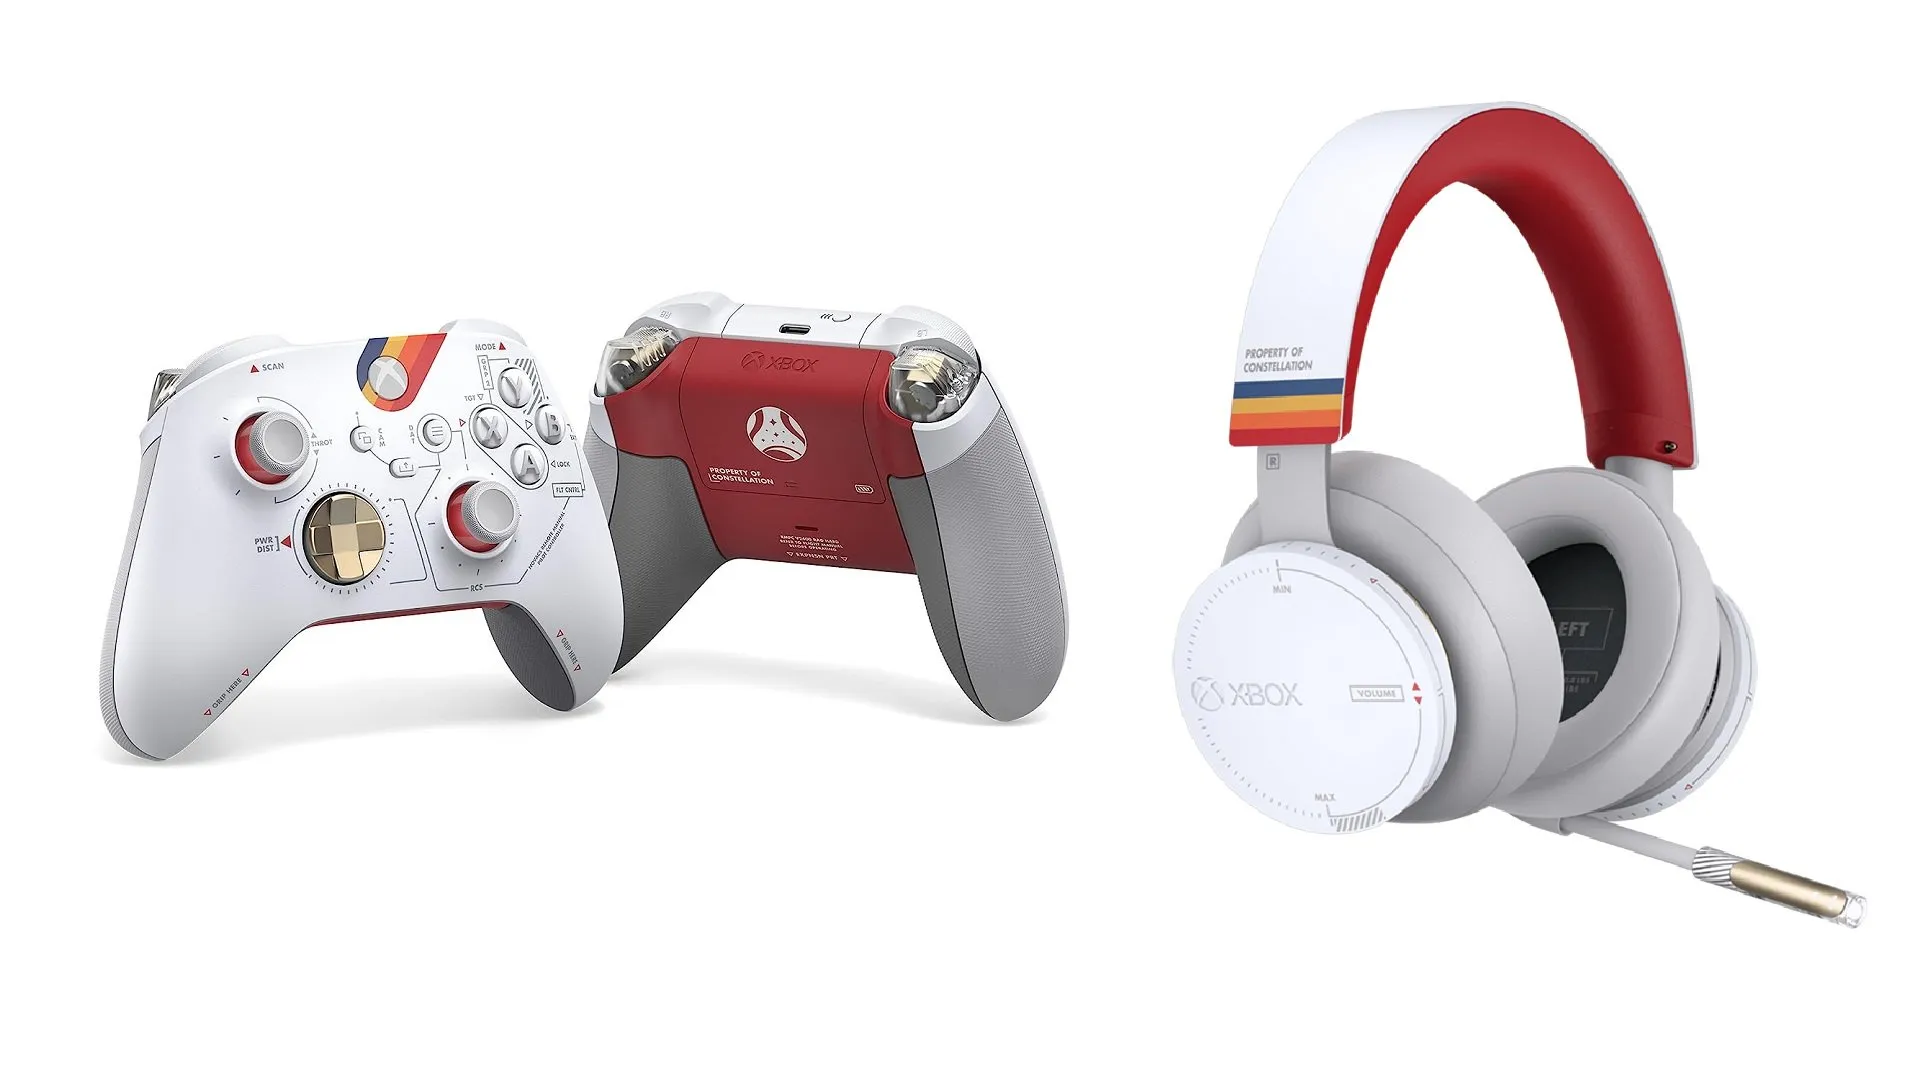 limited edition Xbox controller and headphone